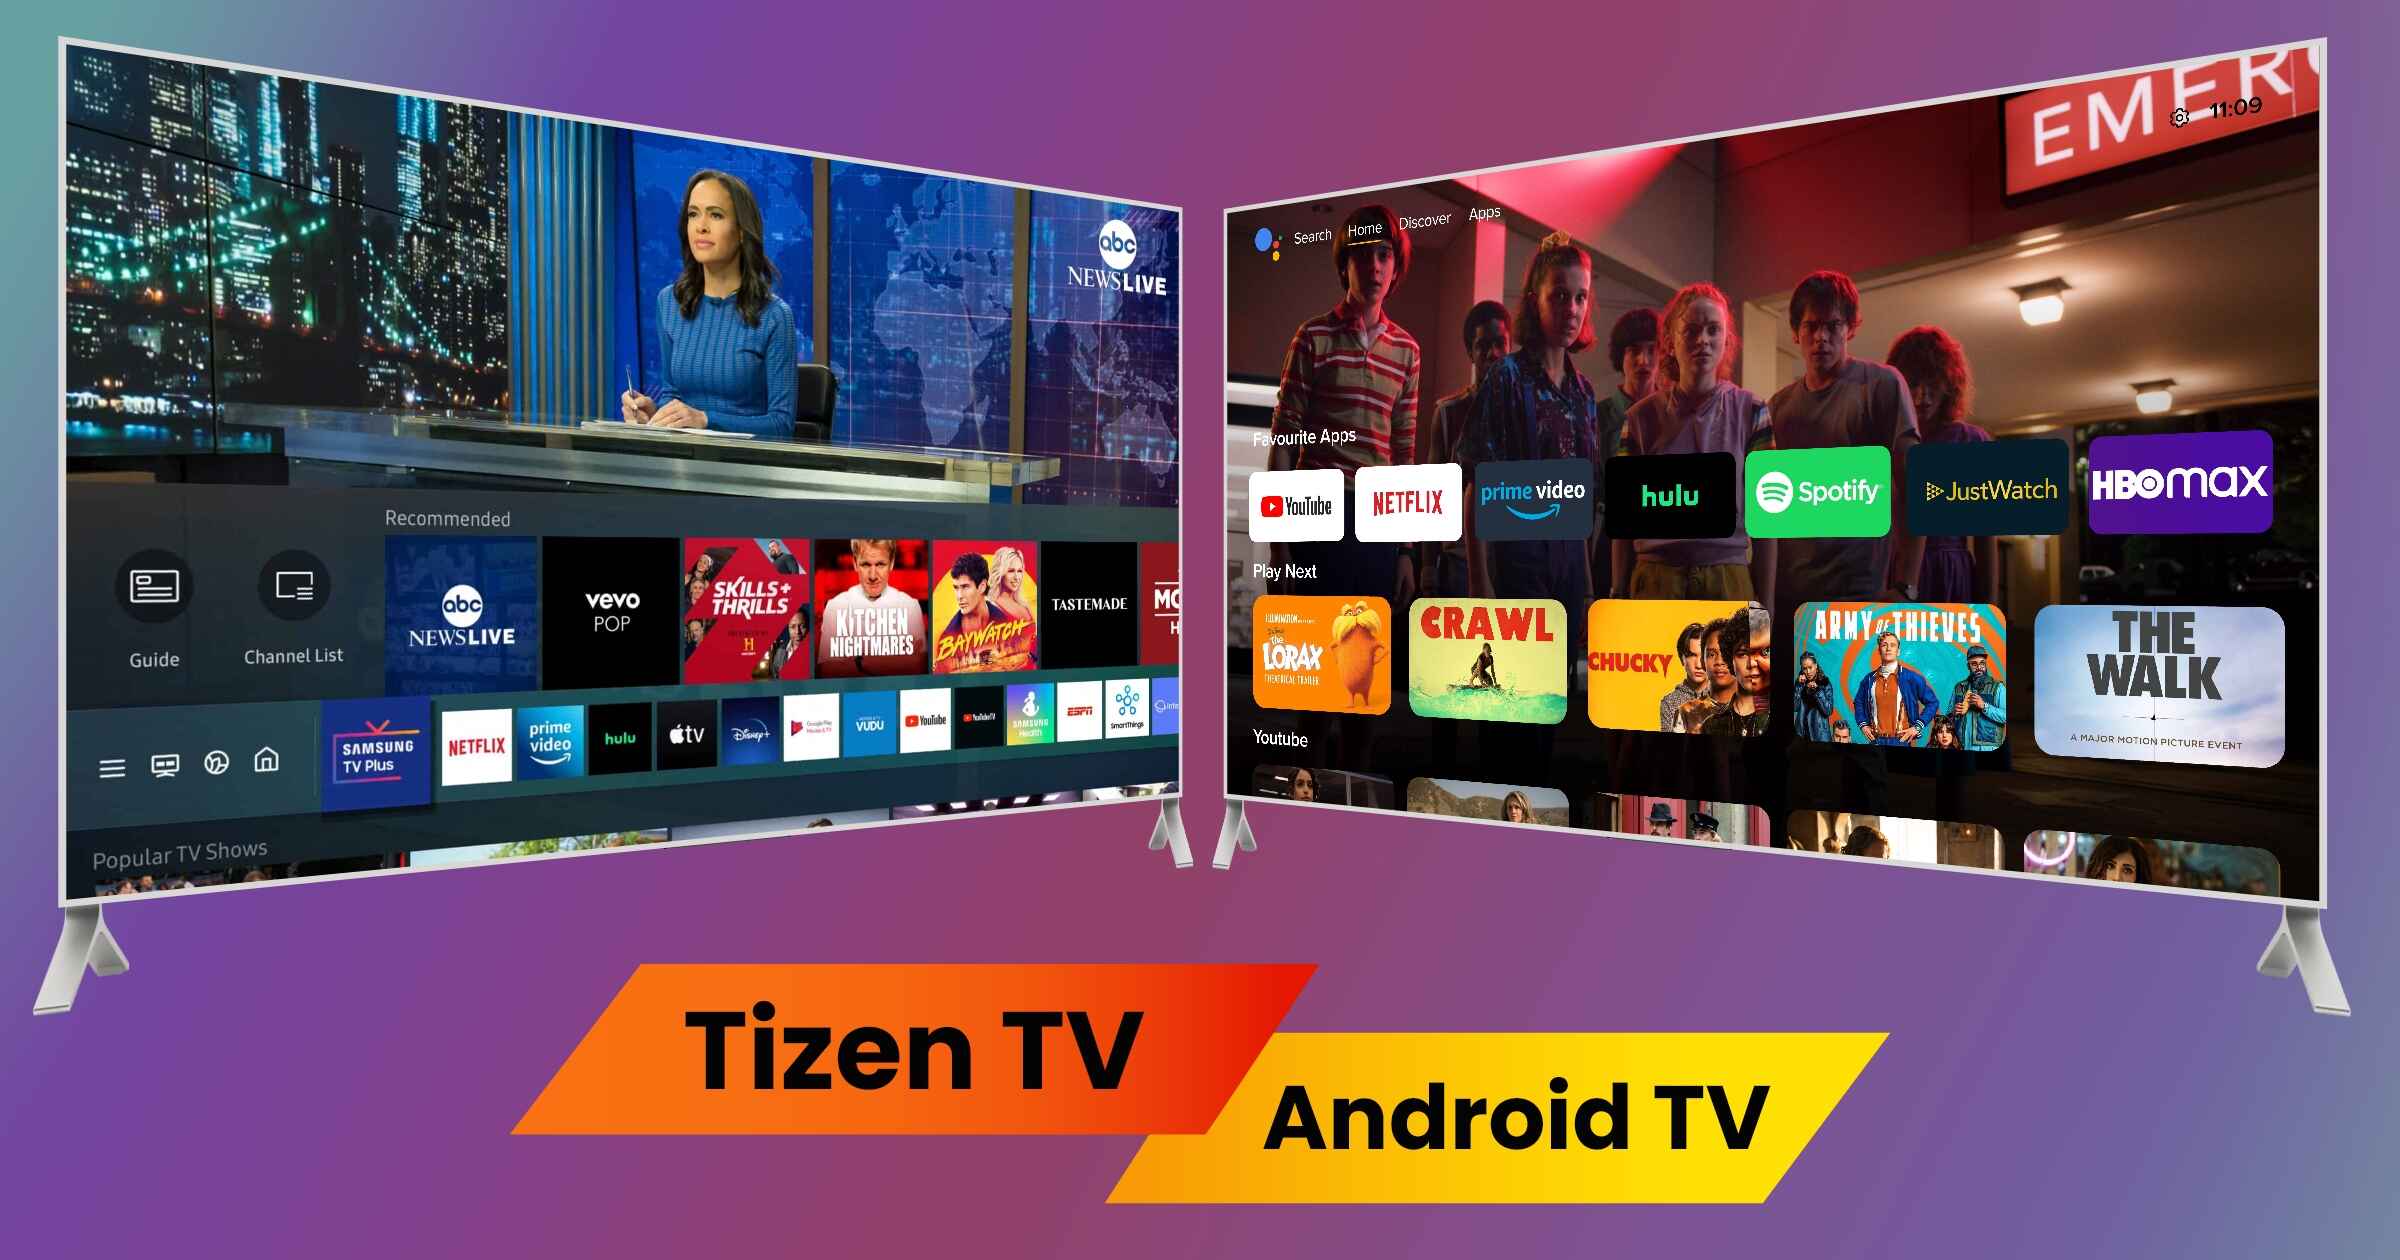 What Is The Difference Between Smart TV And Tizen